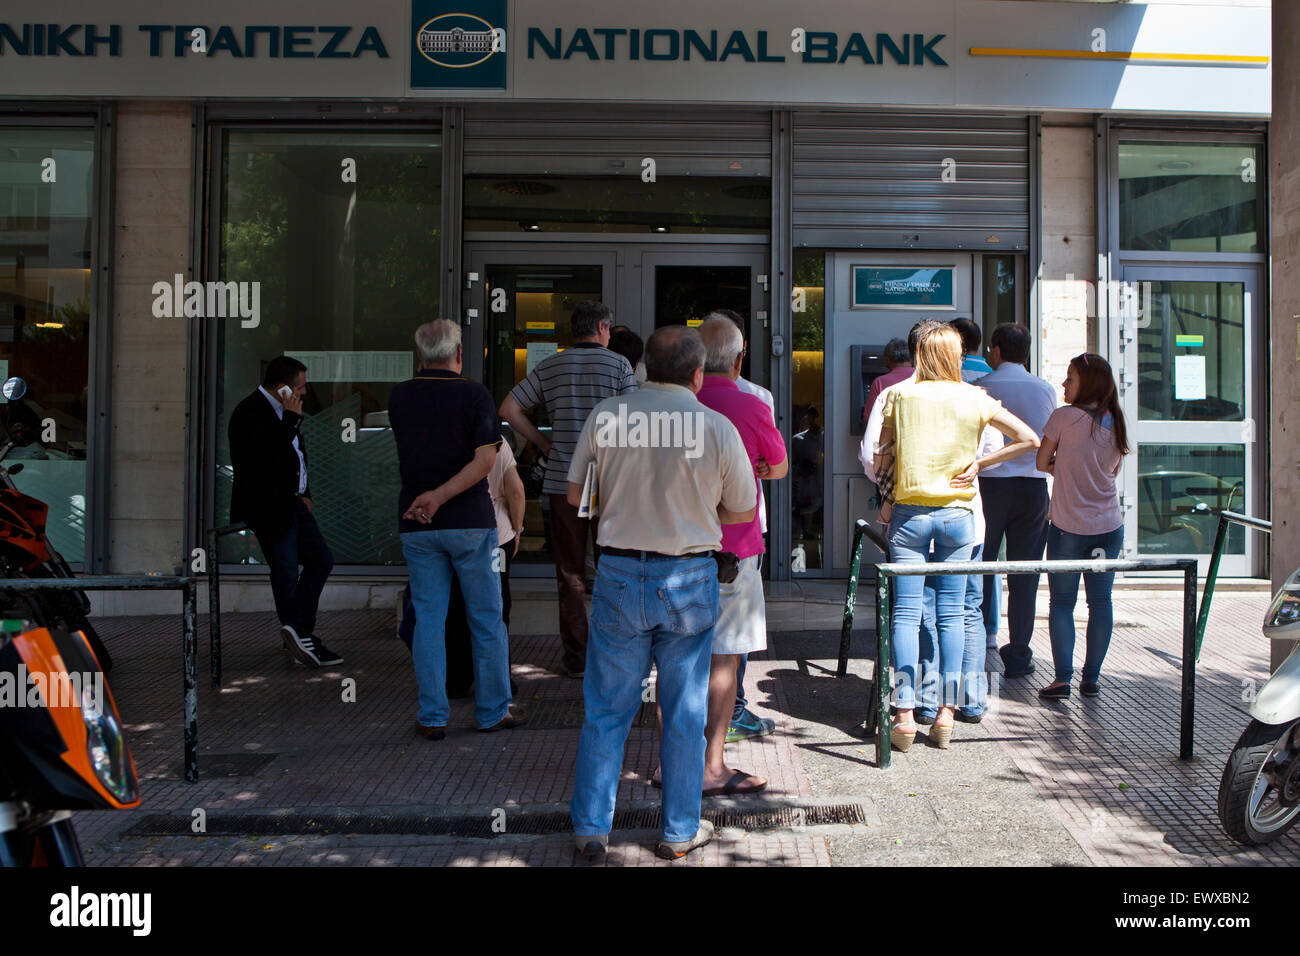 Athens, Greece. 2nd July, 2015. National Bank of Greece queues amid the Bank capital controls in Athens, Greece. Credit:  Martin Garnham/Alamy Live News Stock Photo